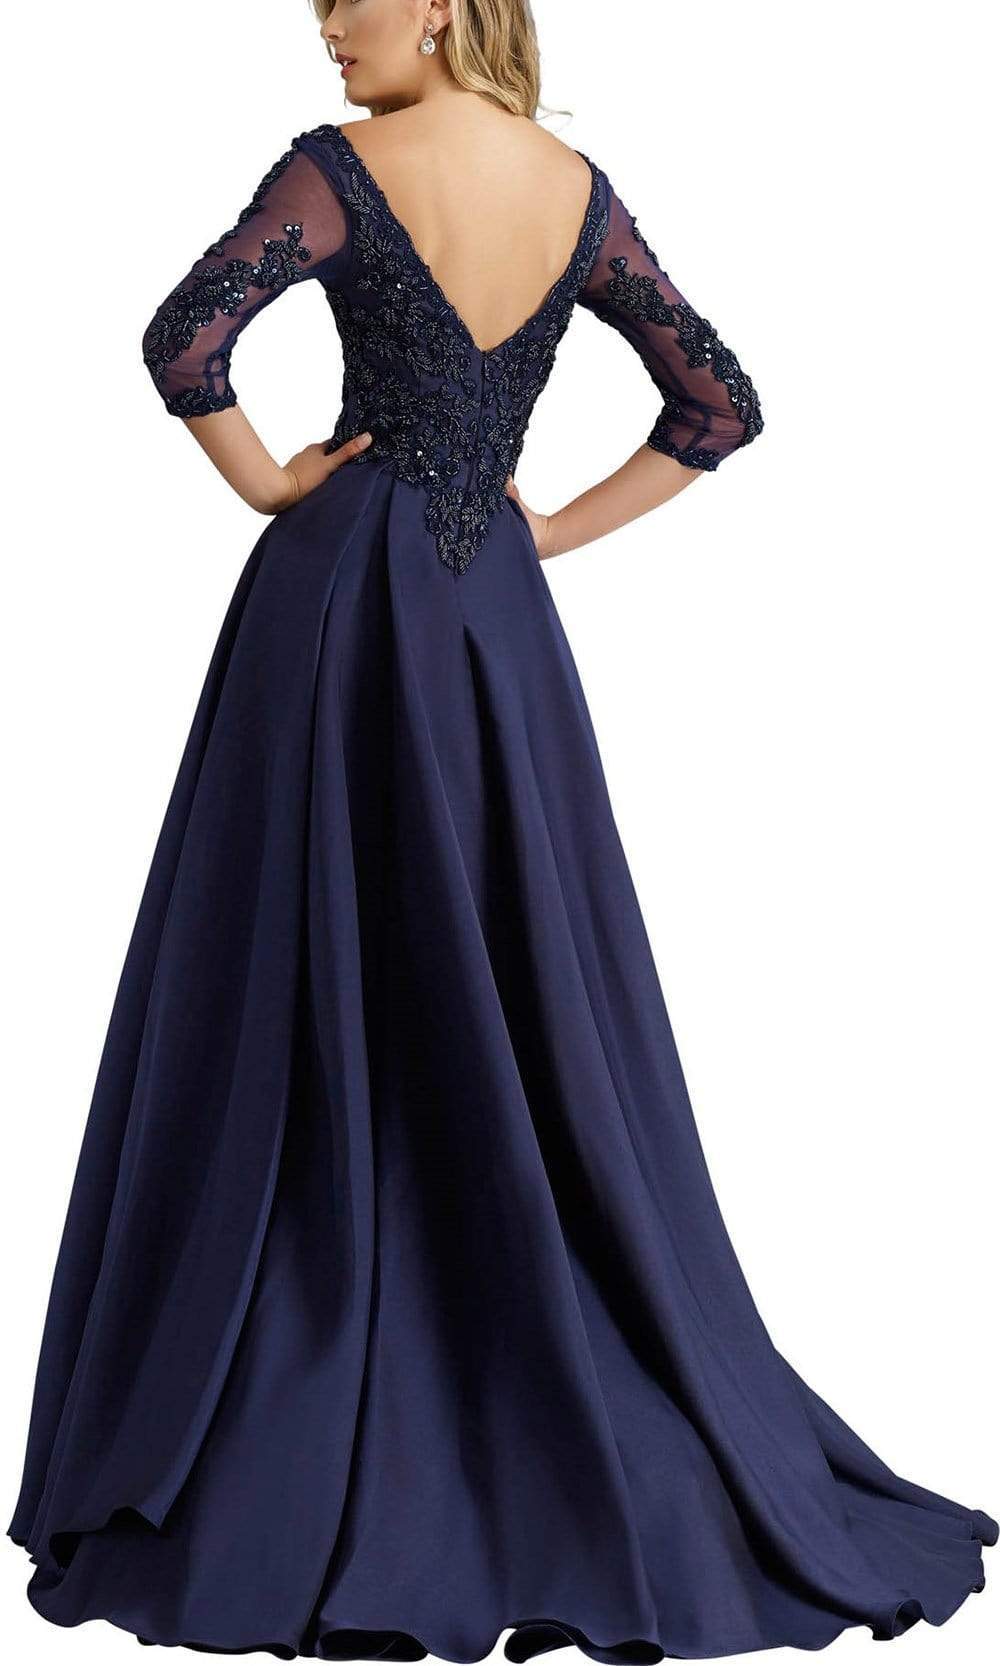 Janique - Embroidered V-Neck Sleeved Long Mermaid Gown JA3009 Special Occasion Dress